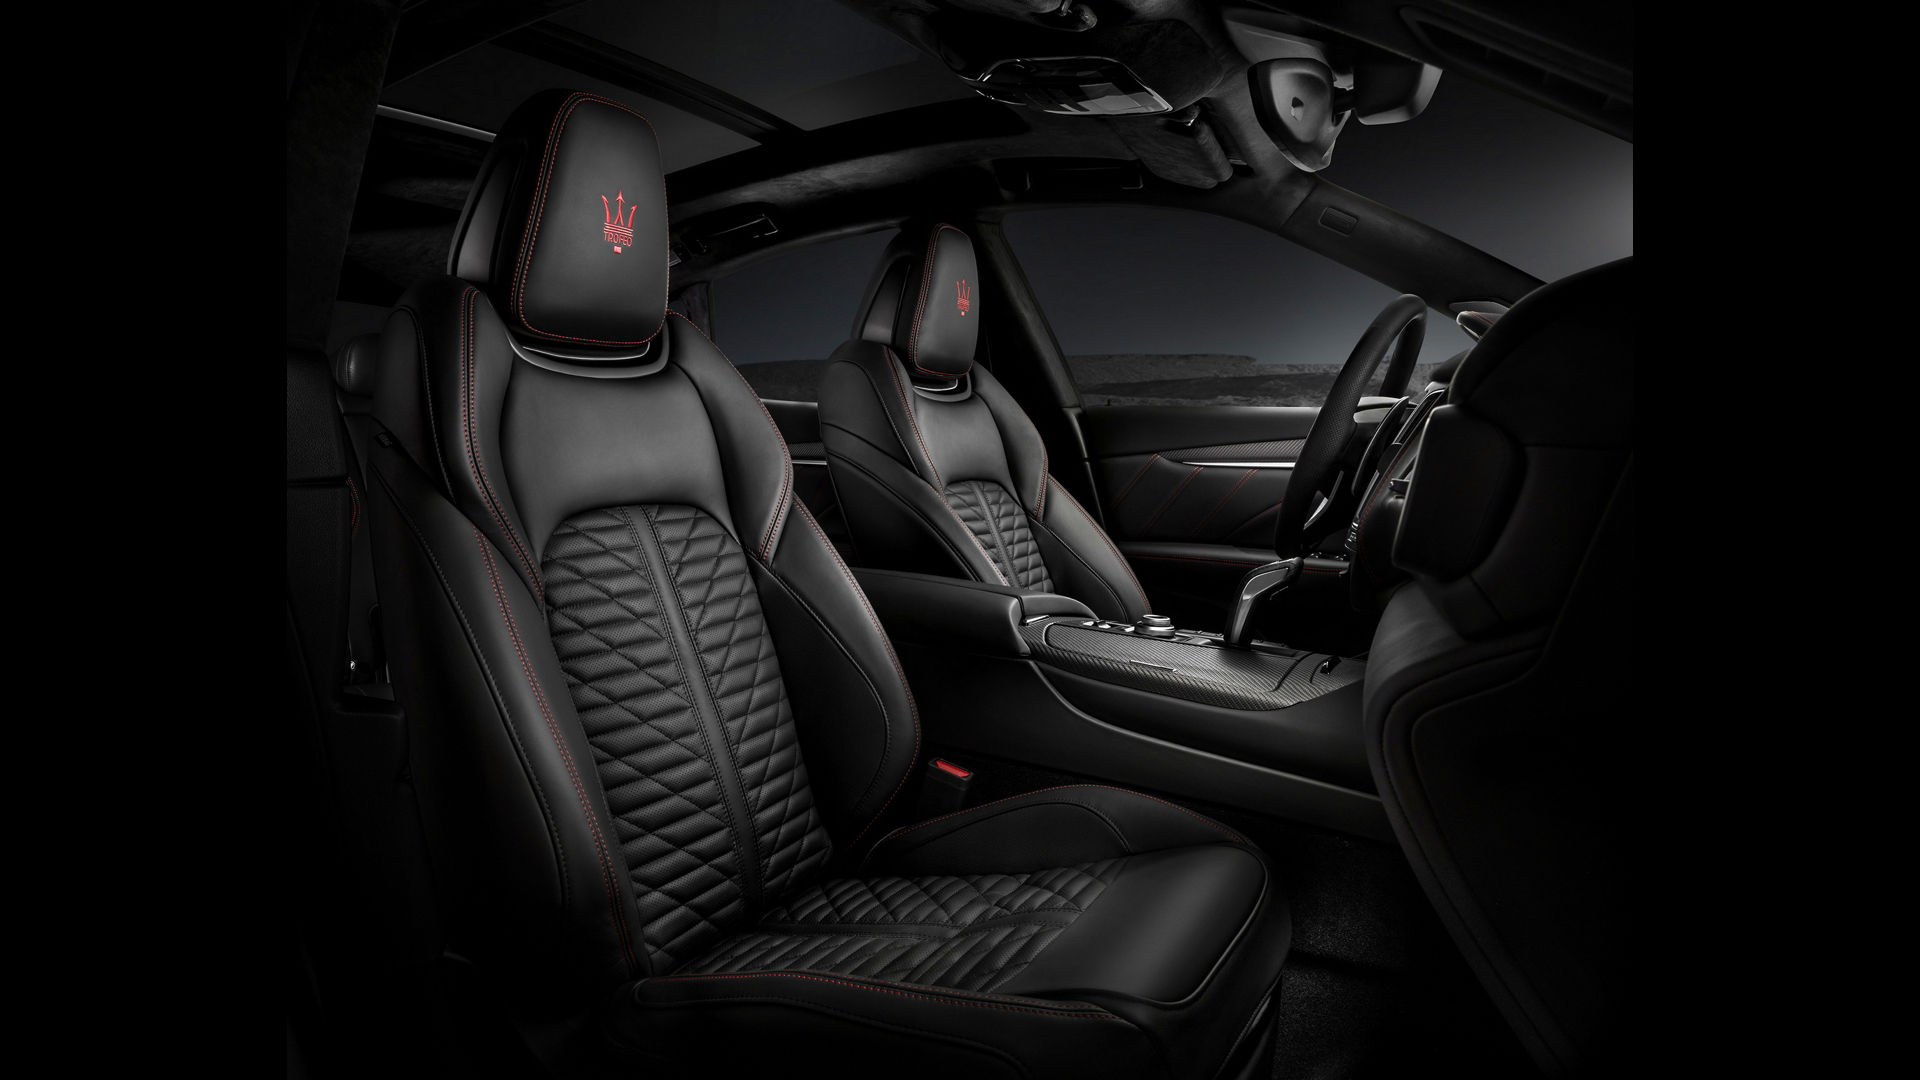 Maserati Levante Trofeo V8 interiors: dashboard, steering wheel, front seats in black leather and red stitching